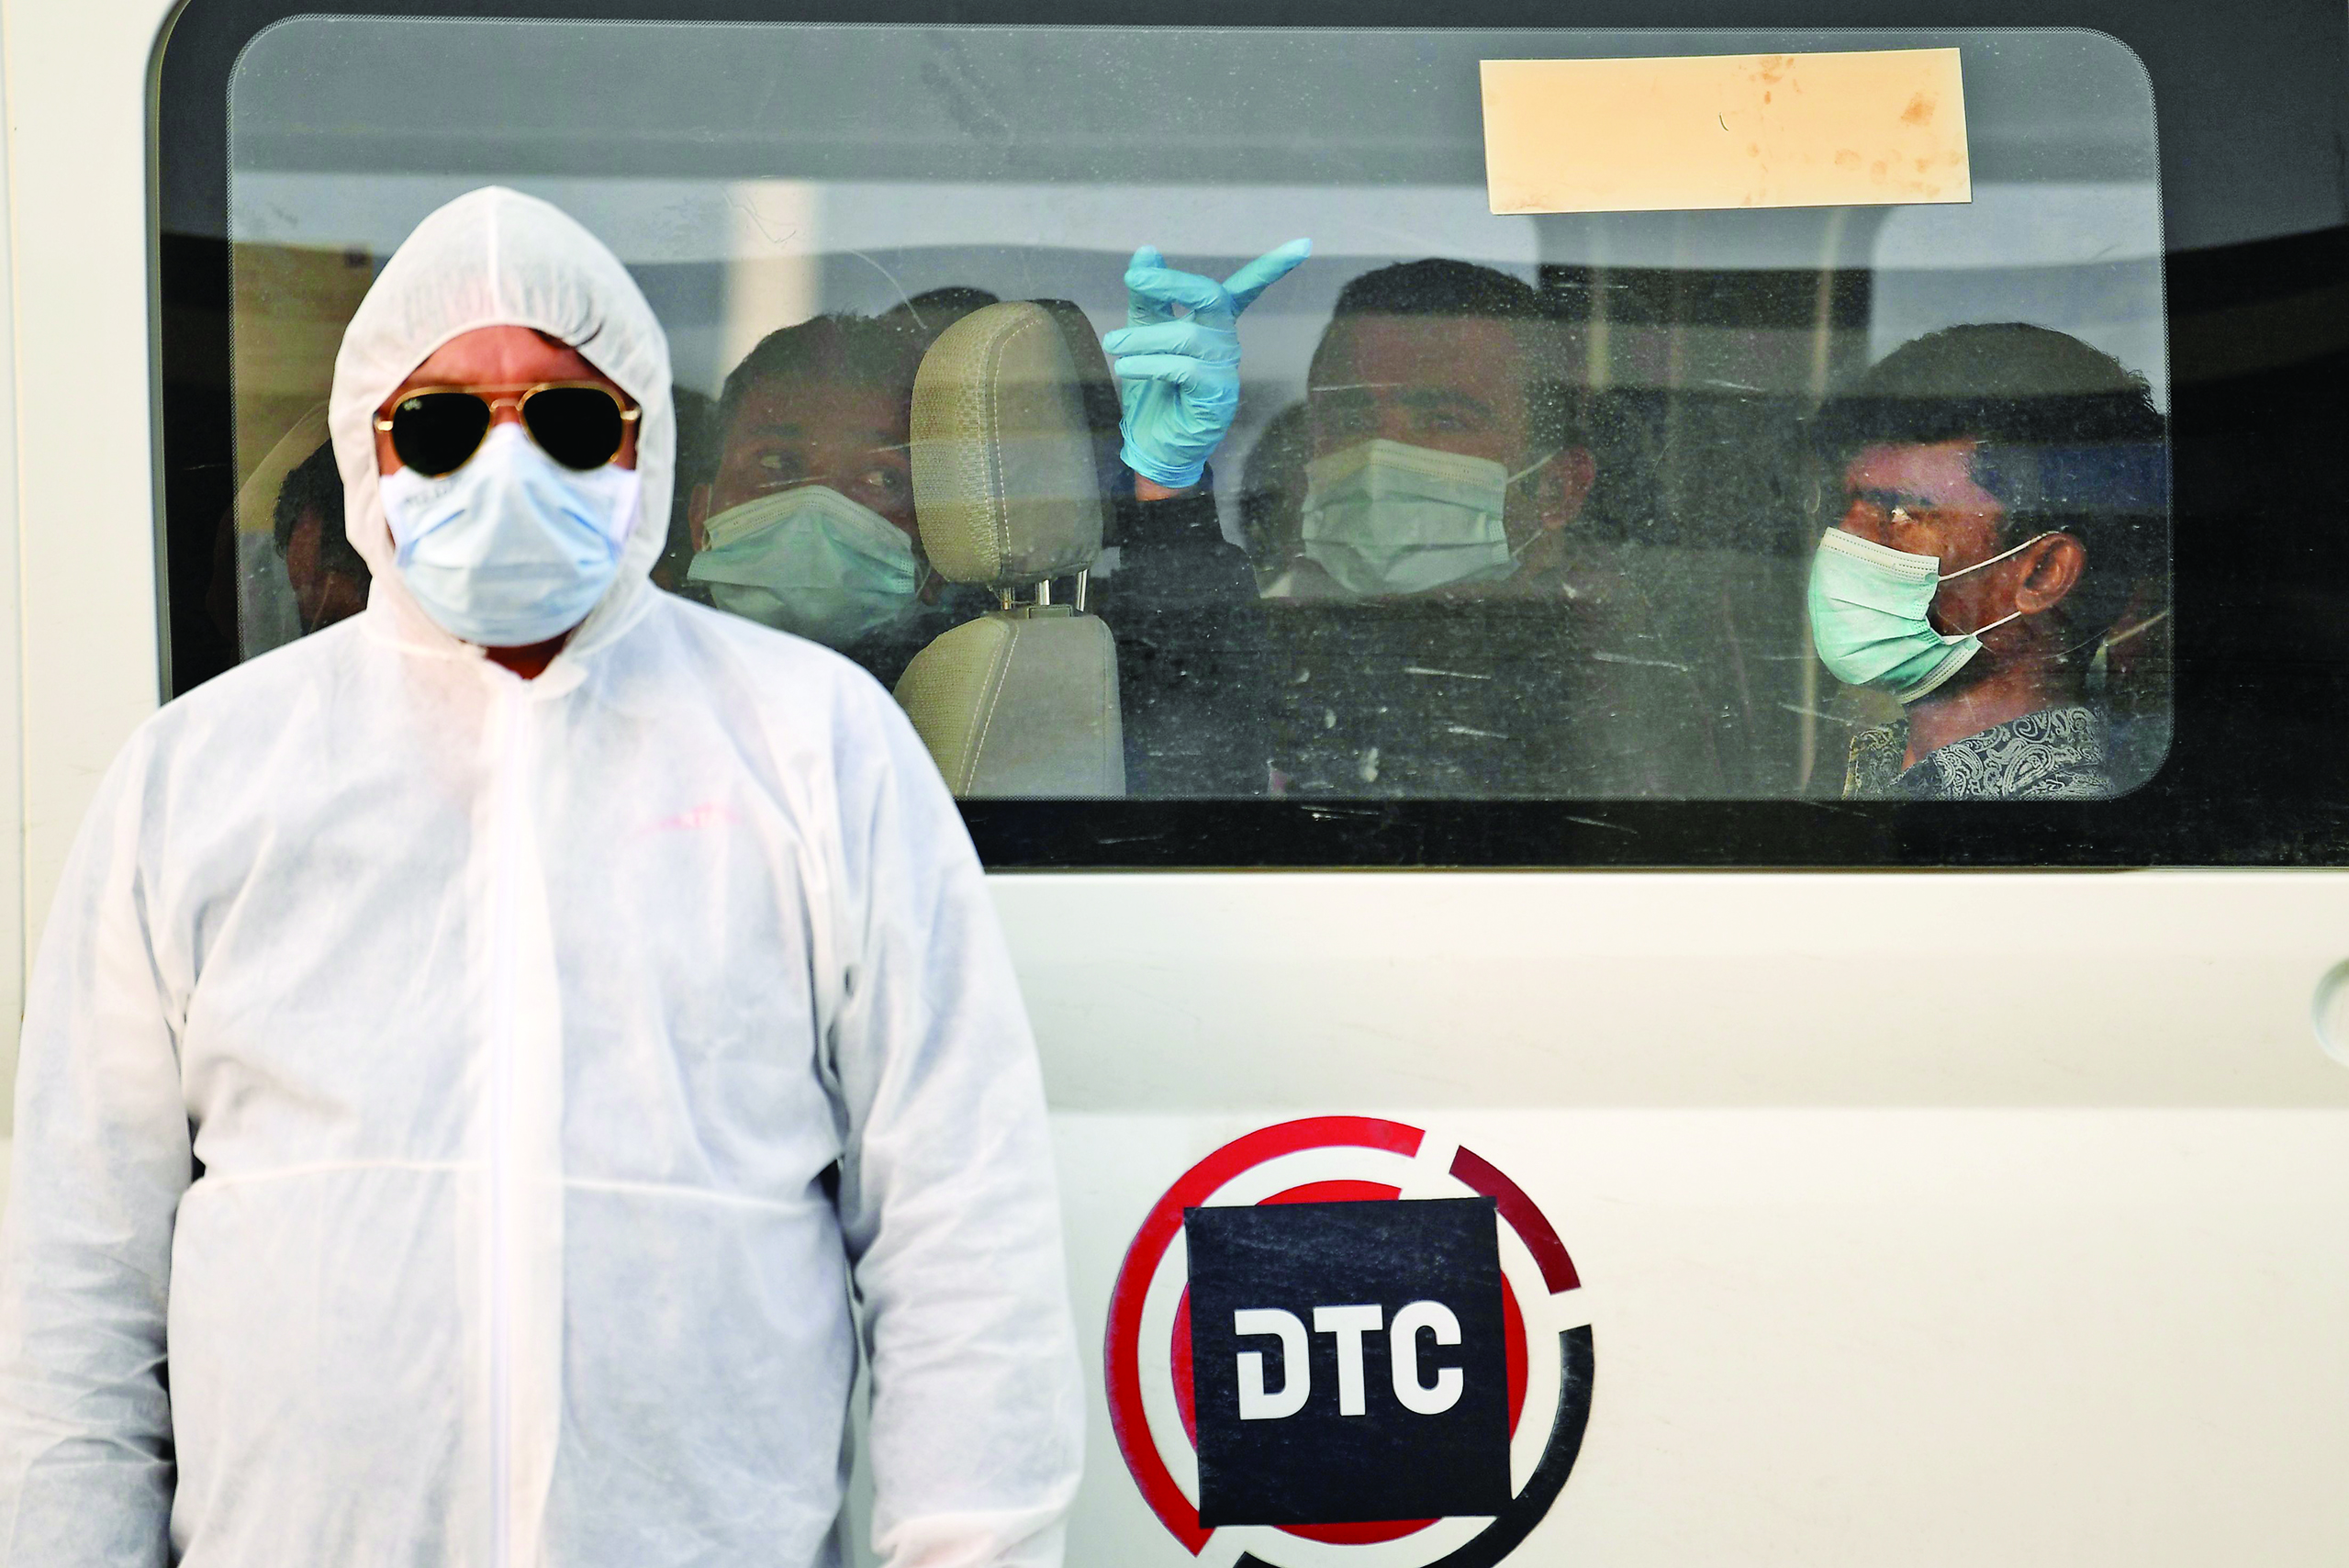 A health worker stands in front of a bus driving migrant workers who have been tested positive for the COVID-19 to the Warsan neighbourhood, where people infected or suspected of being infected by the virus are quarantined, in the Gulf Emirate of Dubai, on April 22, 2020. (Photo by KARIM SAHIB / AFP)